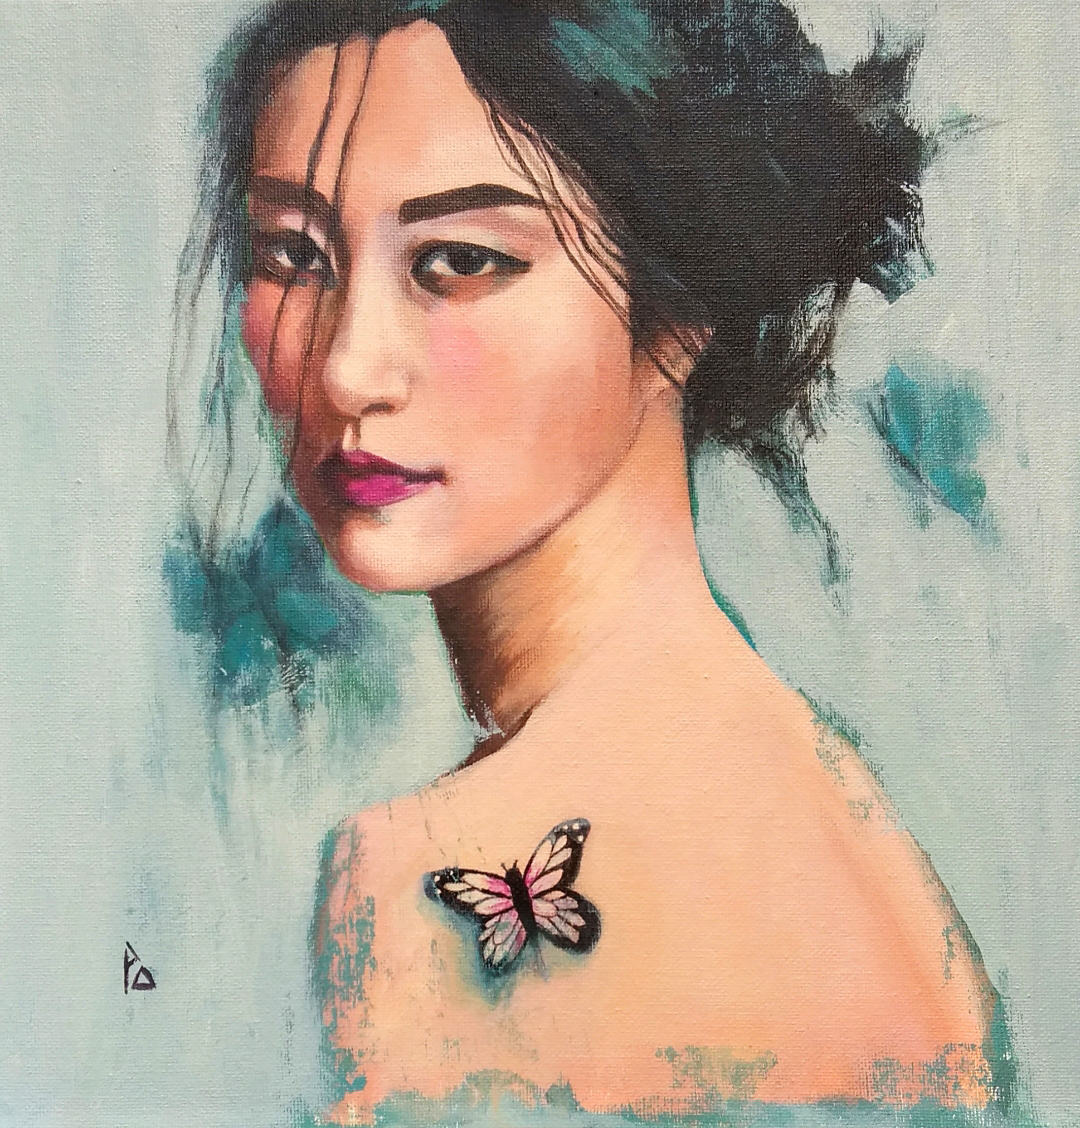 Head and shoulder portrait of a young dark-haired woman by Paola Ditel, with a colourful butterfly on her shoulder.